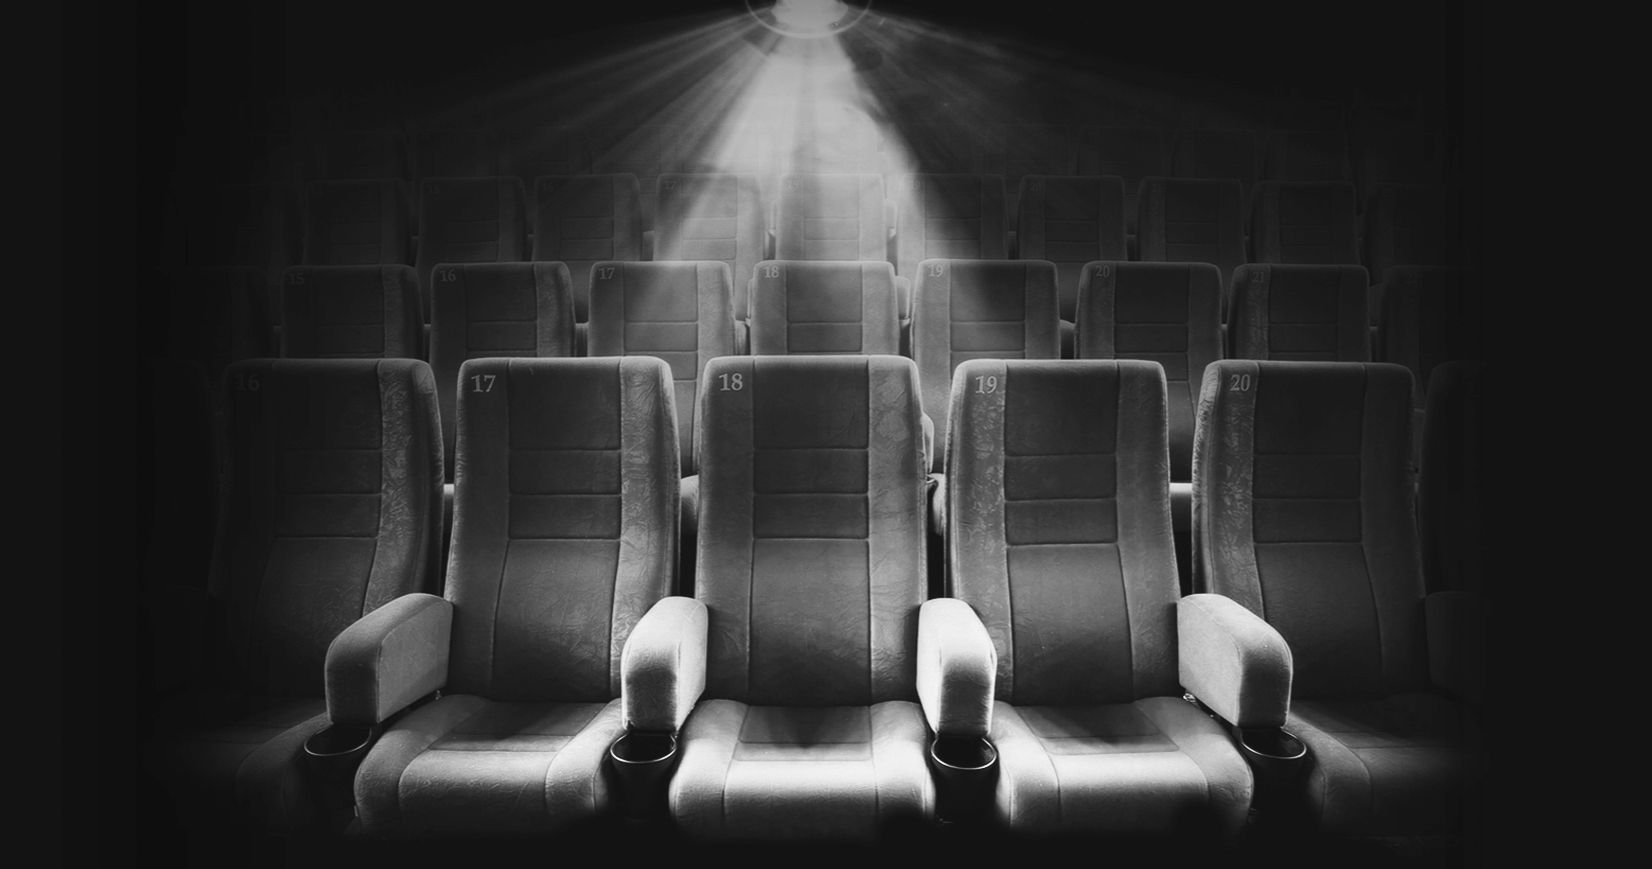 #SaveYourCinema Campaign Launches to Rescue Movie Theaters Across the U.S.